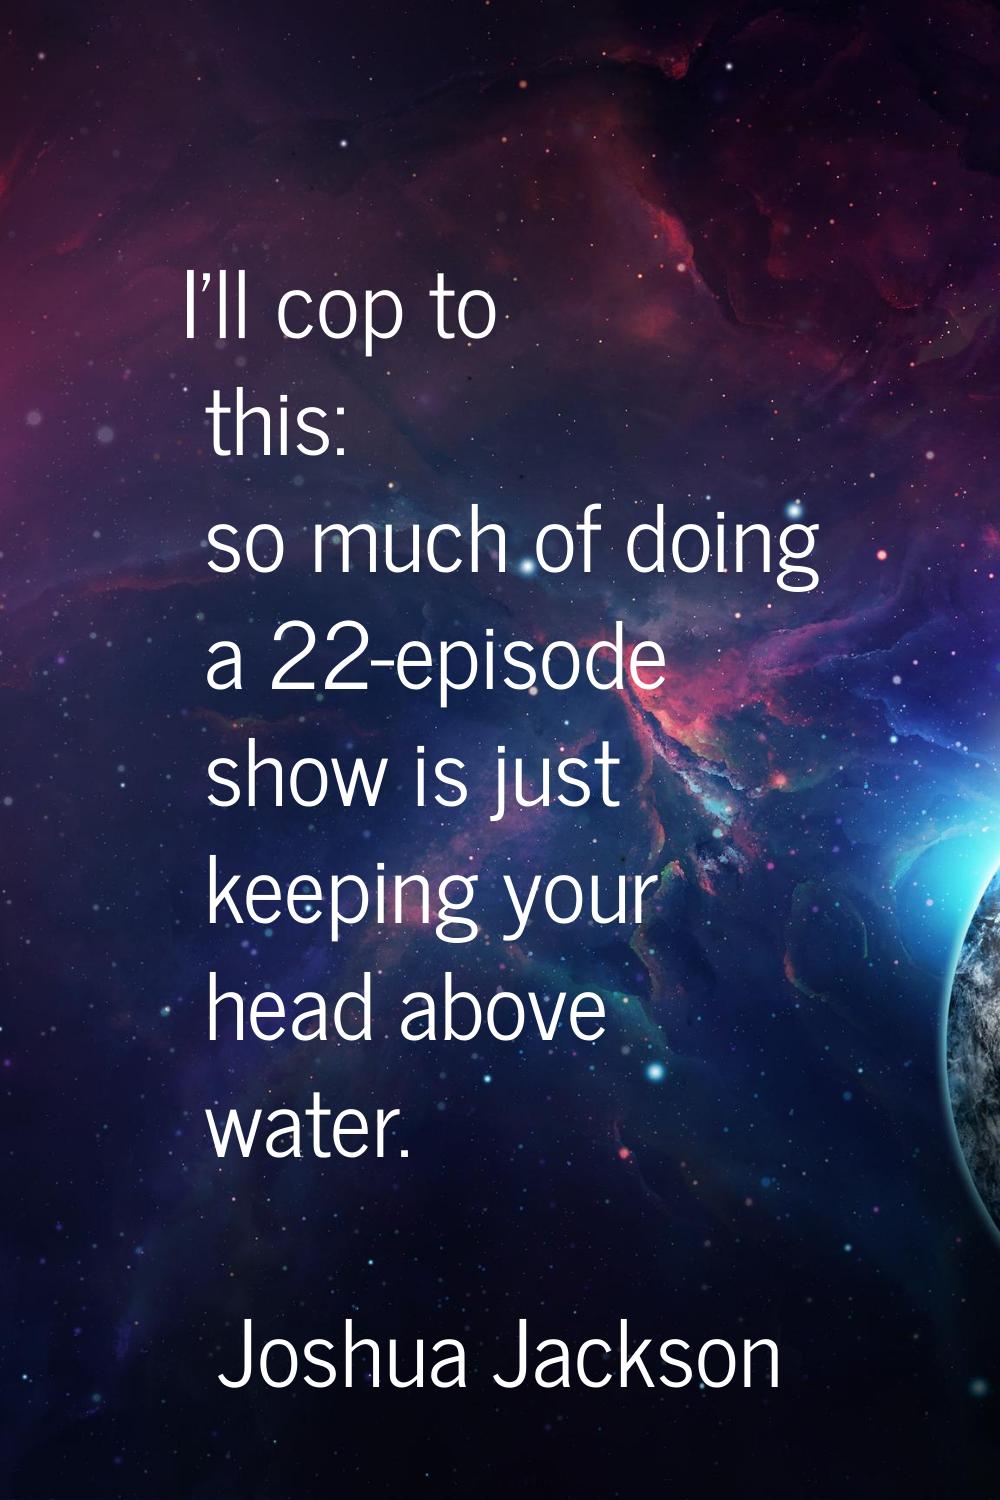 I'll cop to this: so much of doing a 22-episode show is just keeping your head above water.